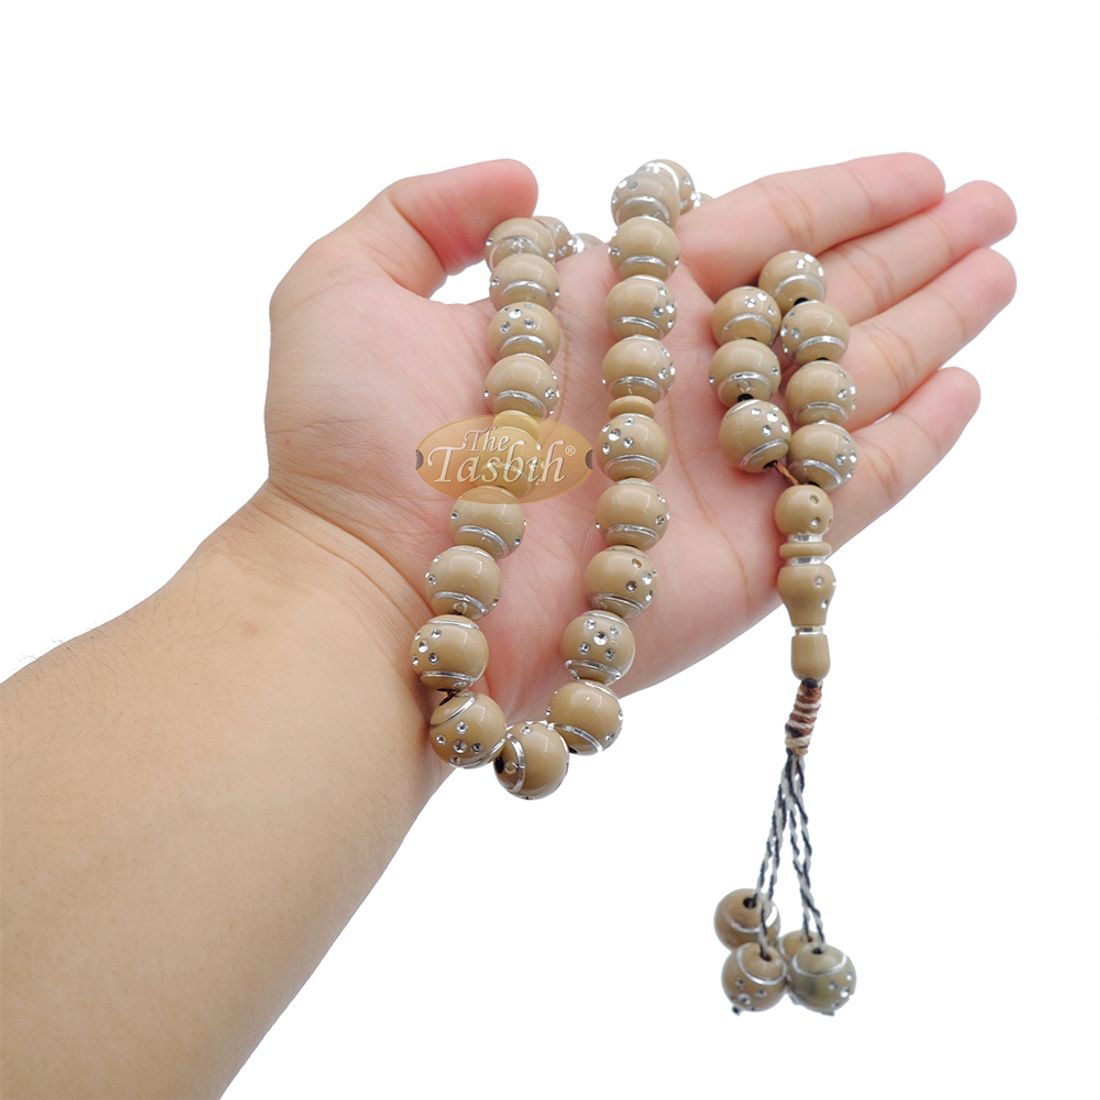 Large Muslim Prayer Beads 14mm Brown Plastic Resin Electroplated Silver-tone Dots 33-ct Prayer Dhikr Beads